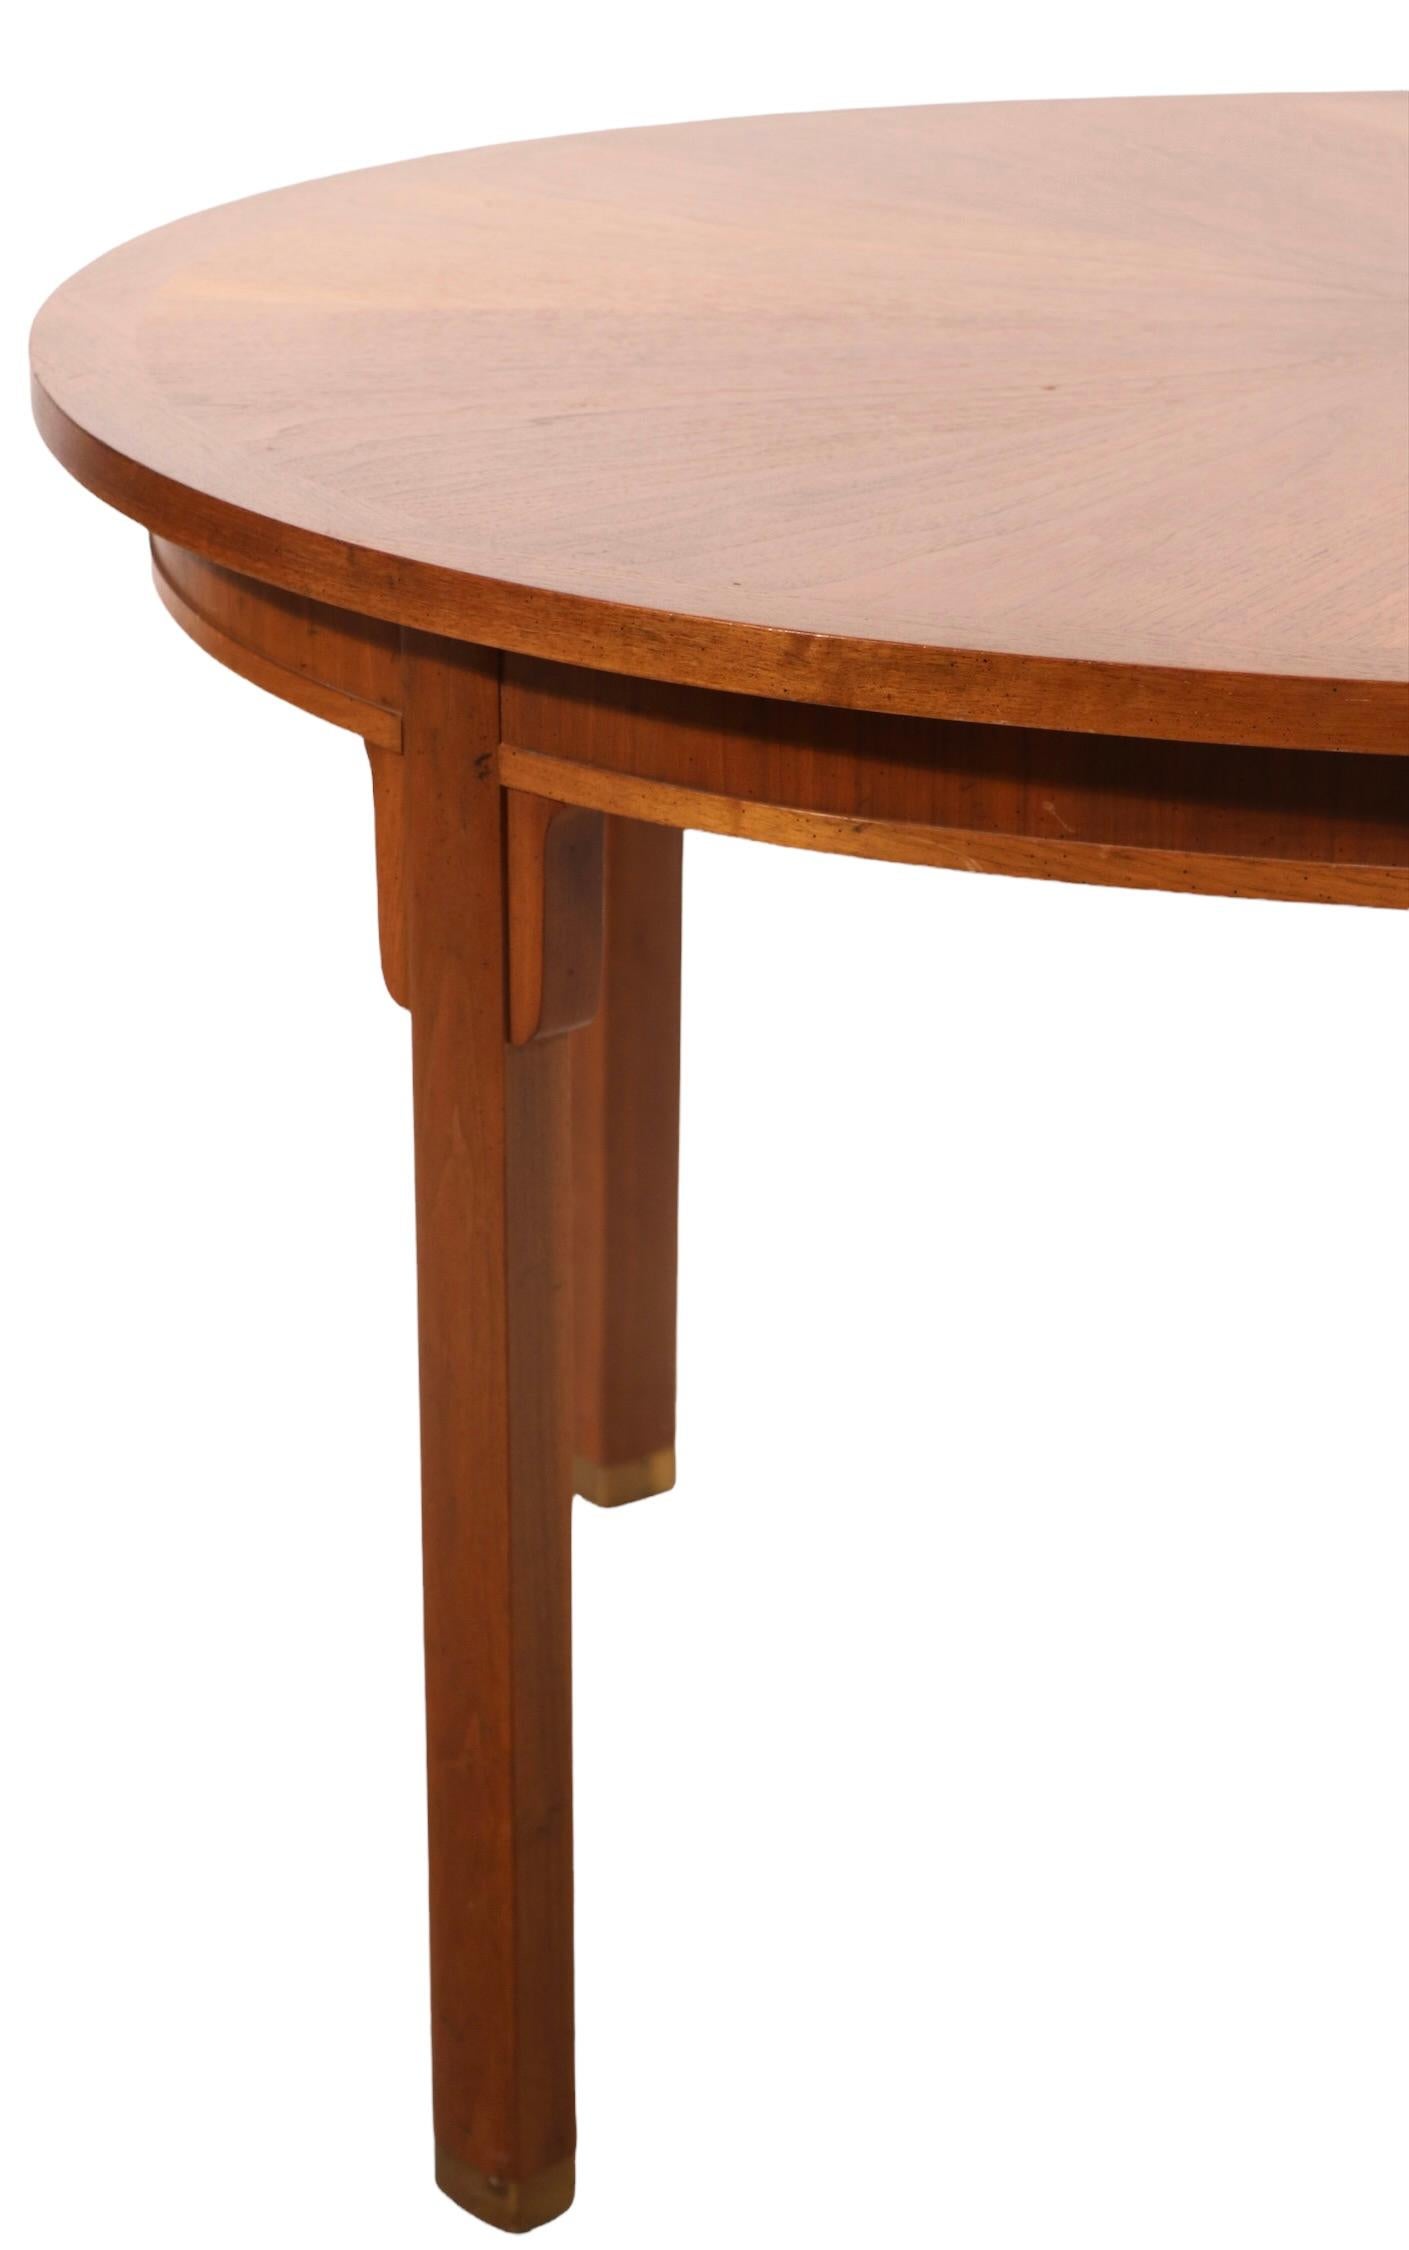 Veneer Chinese Asia Modern Style Dining Table by Milling Road Baker Furniture Company 